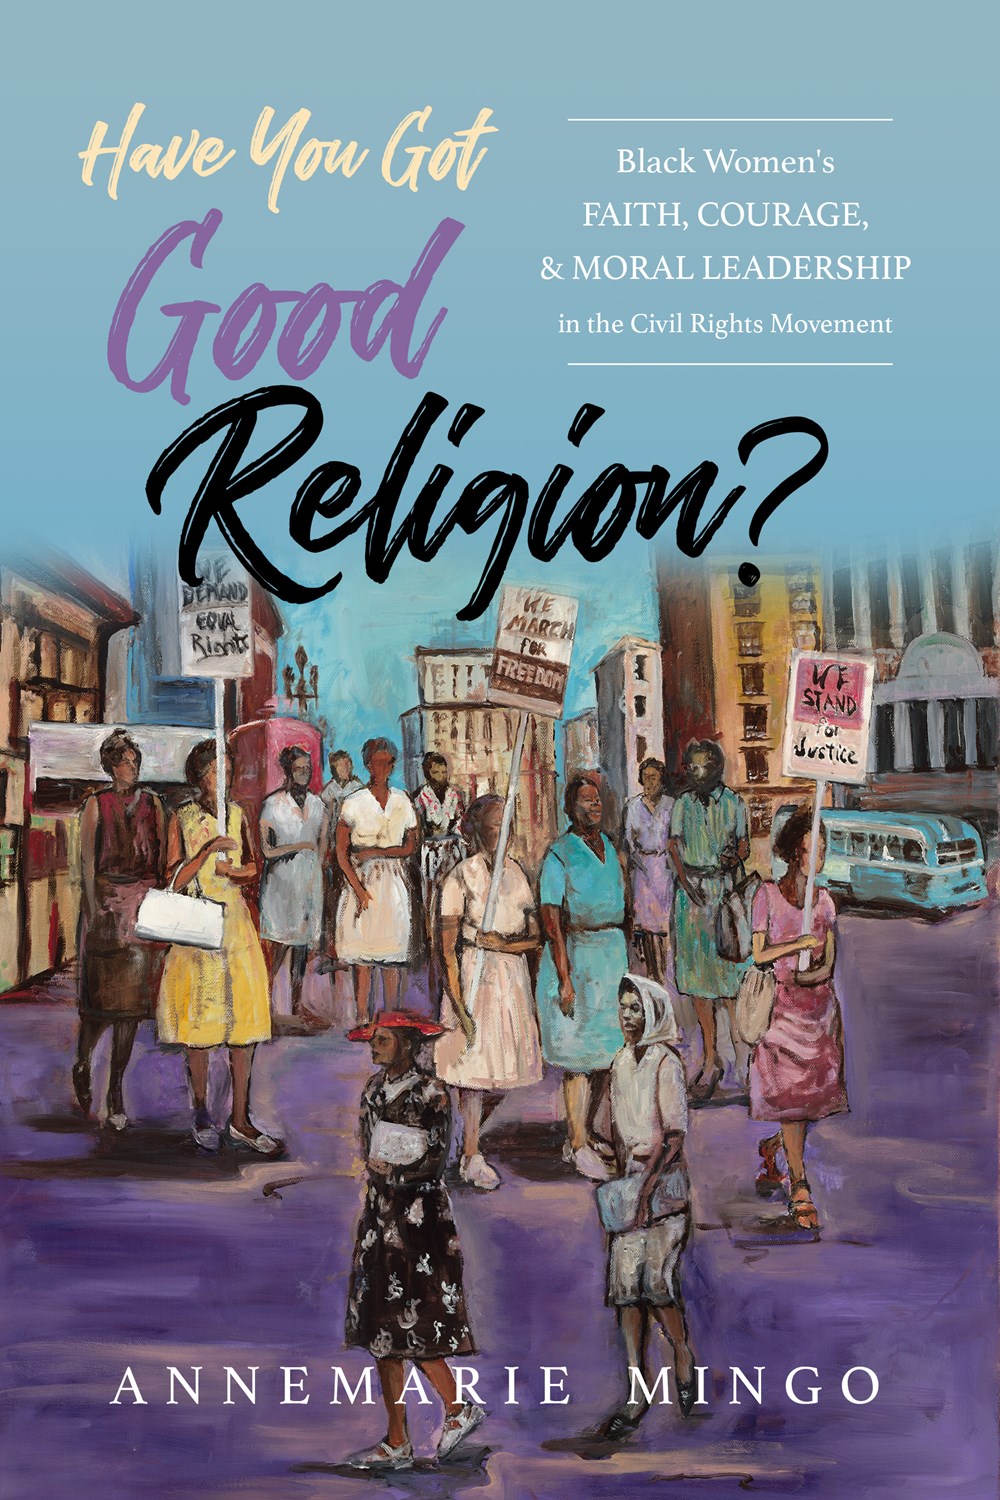 Have You Got Good Religion? Black Women’s Faith, Courage, and Moral Leadership in the Civil Rights Movement